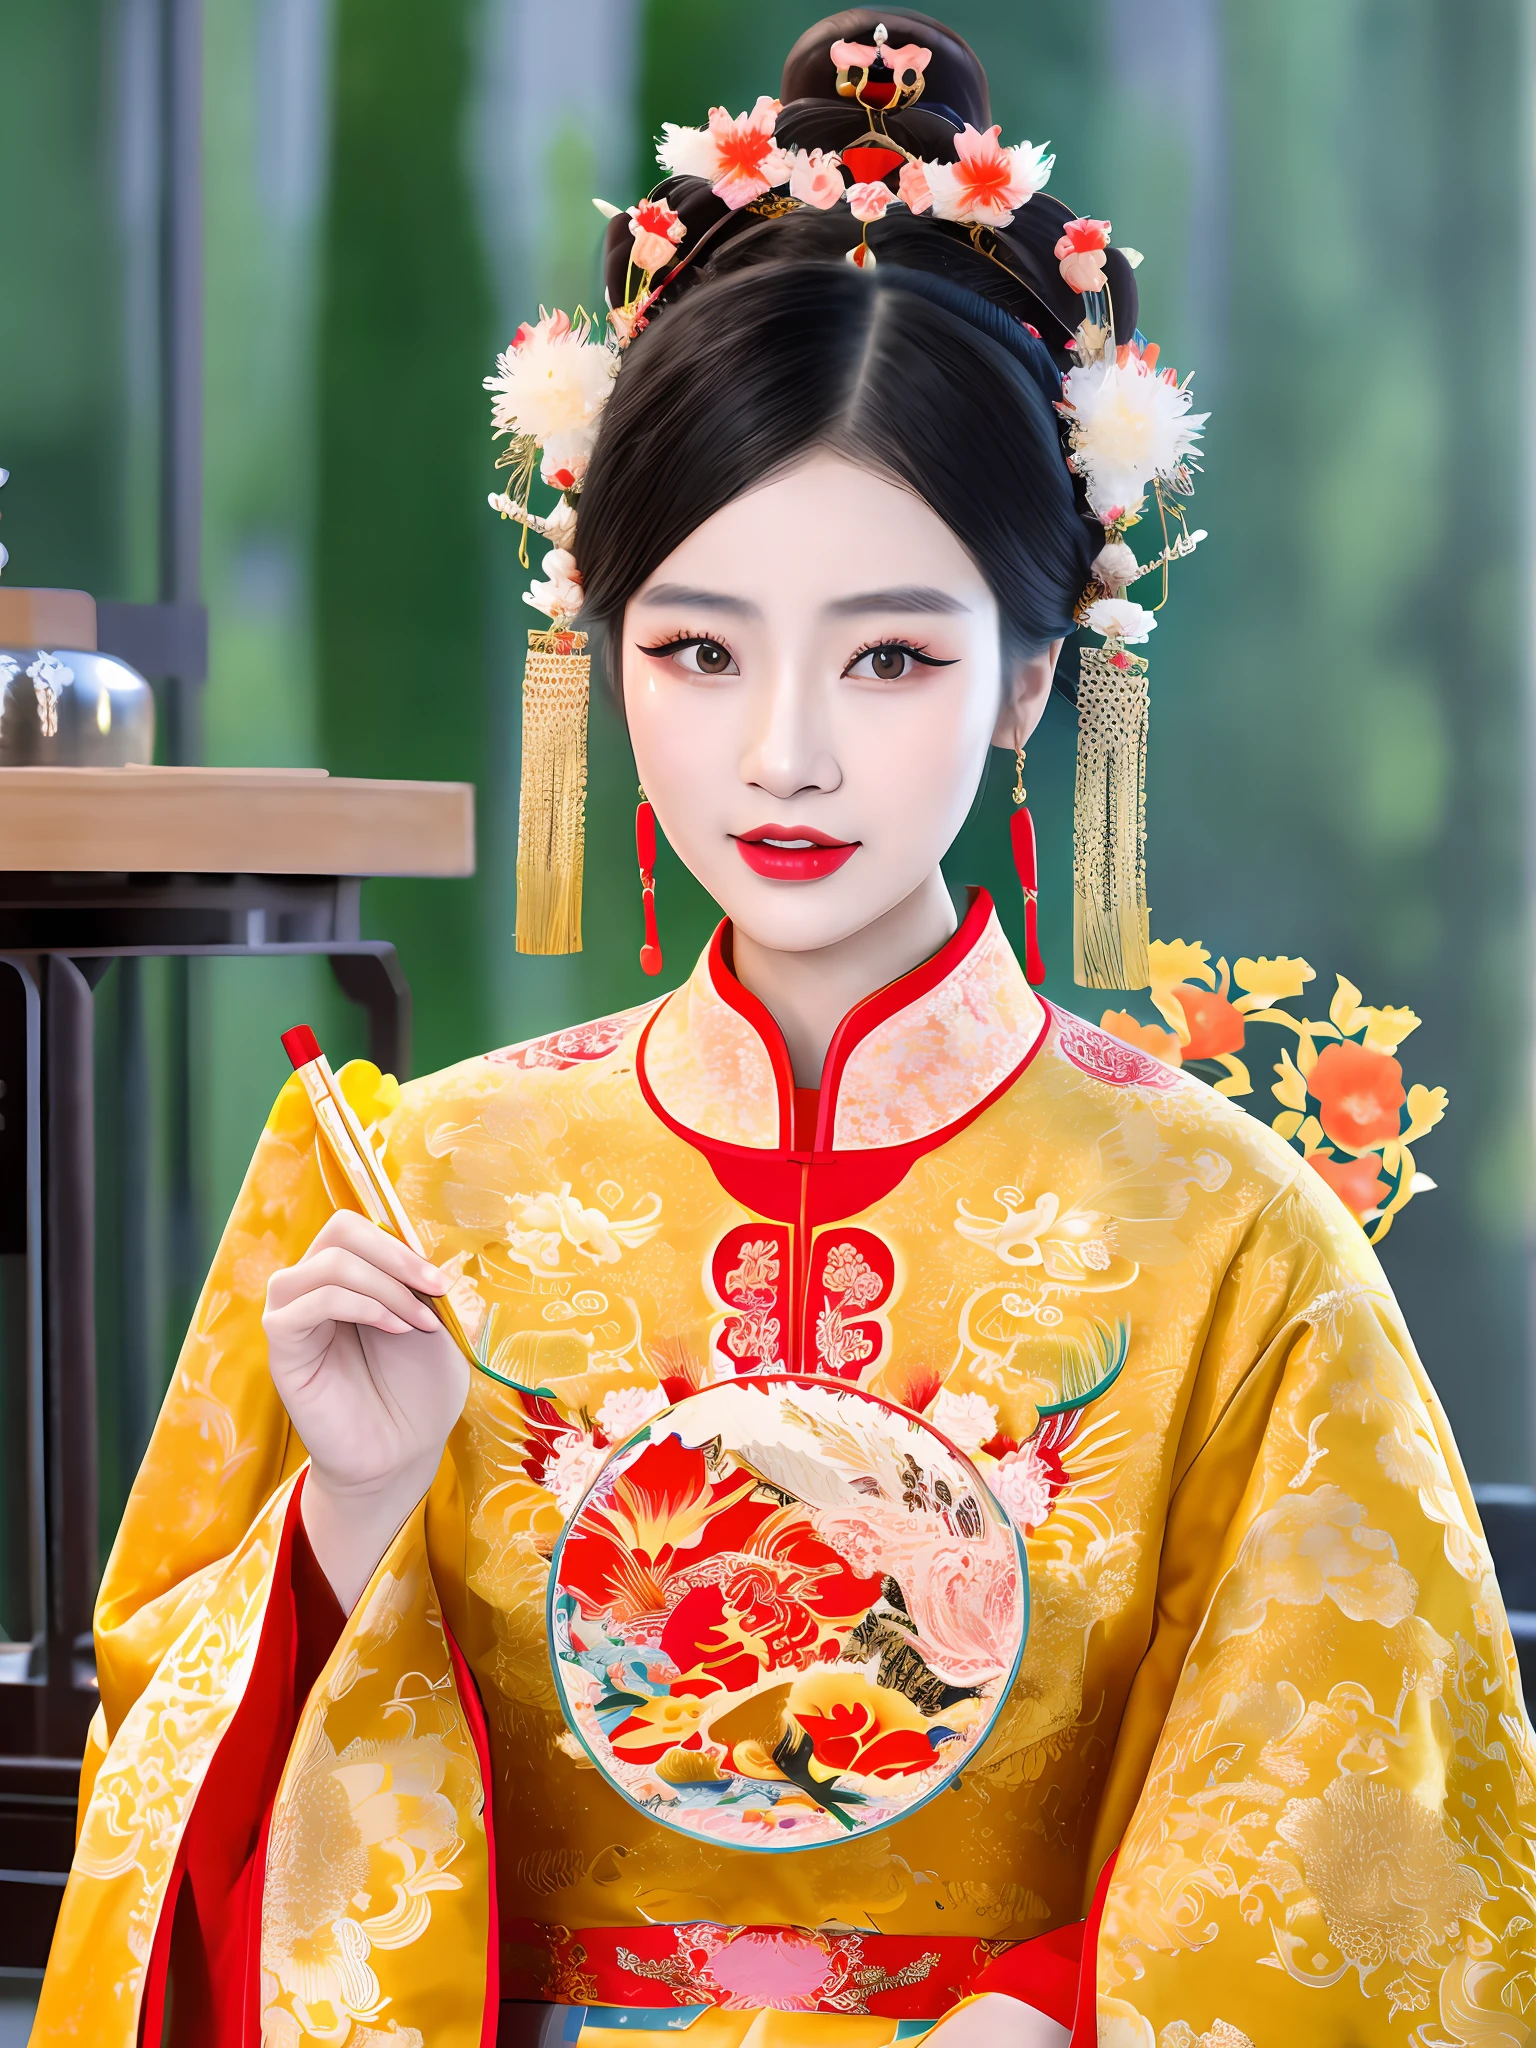 Chinese woman, traditional makeup, traditional beauty, Ruan family beauty! , Yunling, Chinese traditional, gorgeous Chinese model, wearing ancient Chinese costumes, Chinese girl, Chinese empress, palace, Hanfu girl, cheongsam, Chinese princess, inspired by Huang Ji, young and cute wan Asian face